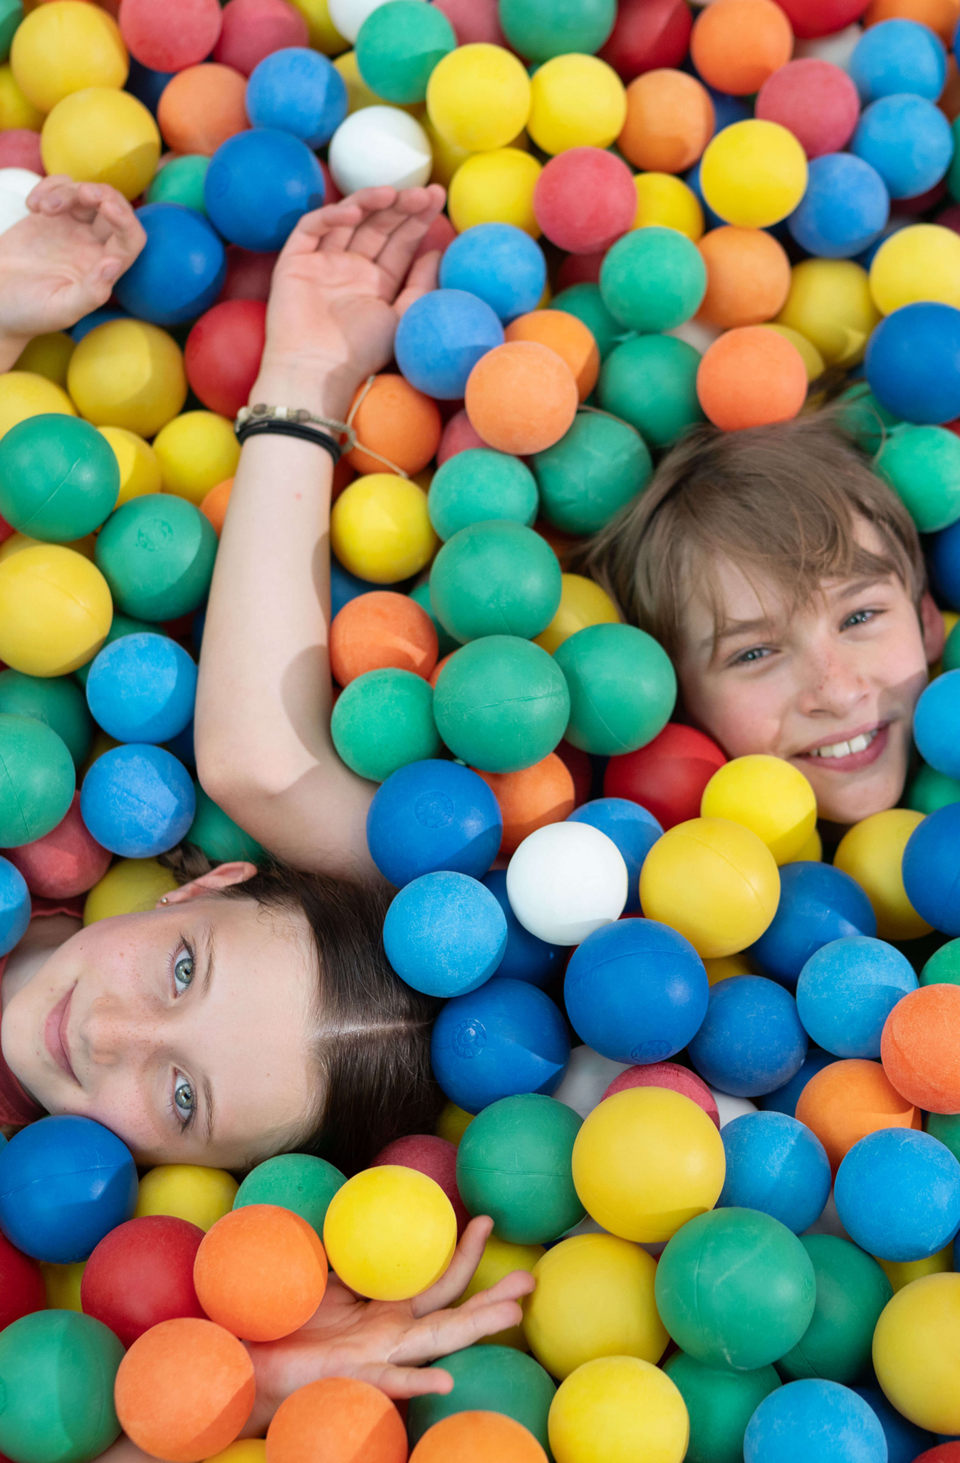 Europe's largest ball pool in northern Germany